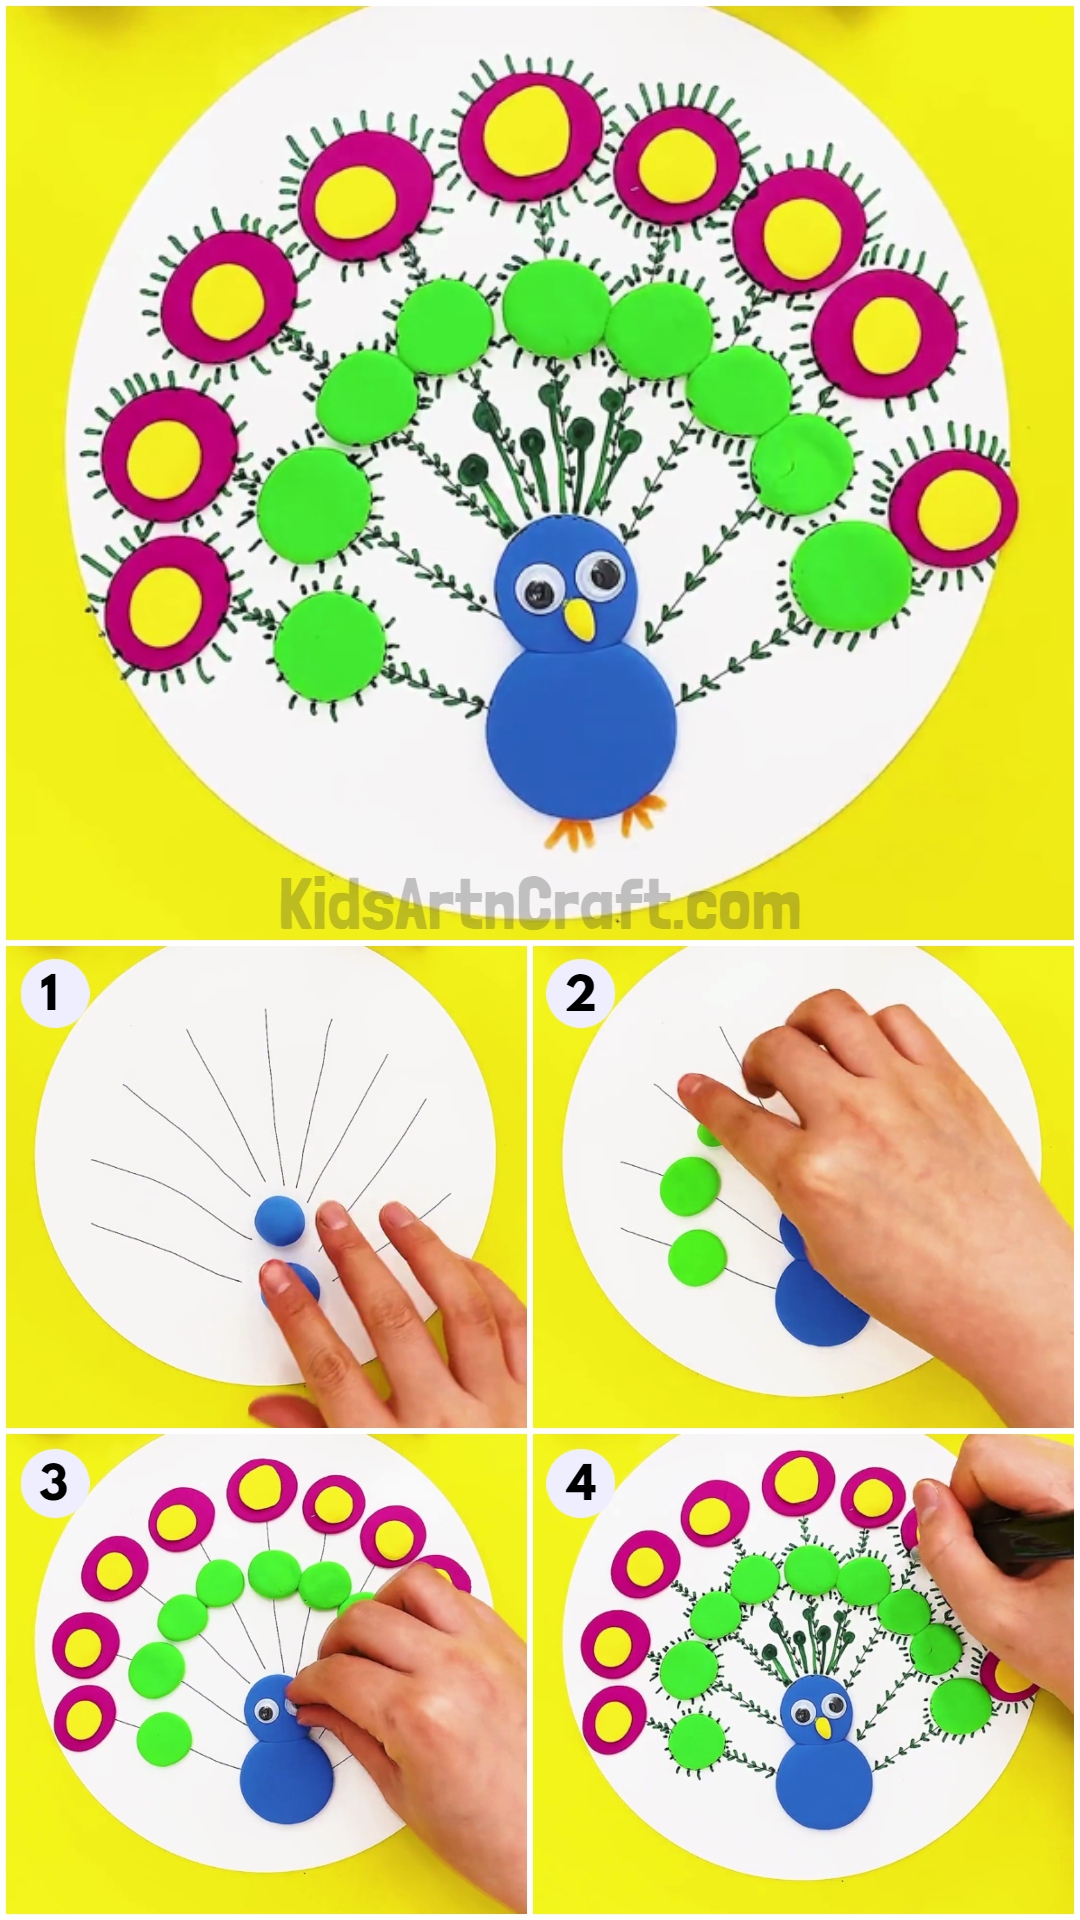 How to make Clay peacock easy Tutorial for Kids